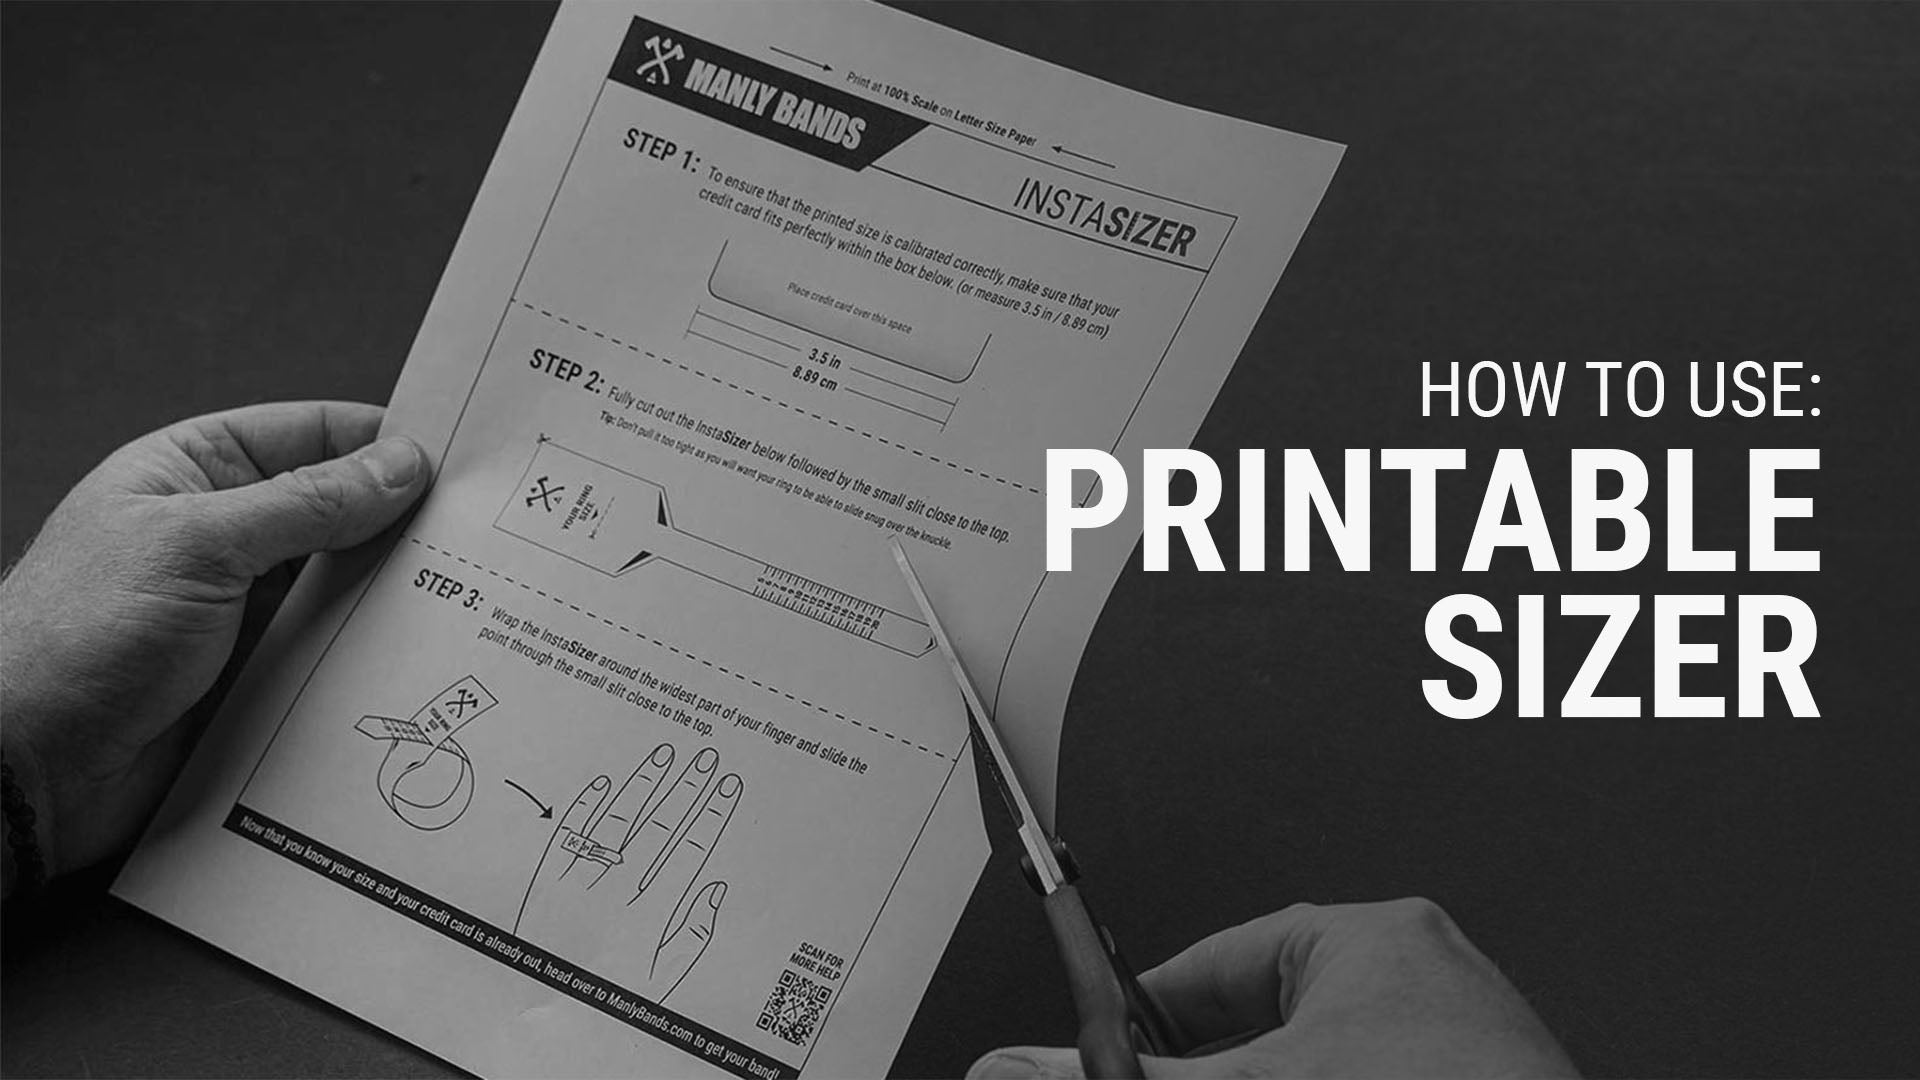 Load video: How to use the printable ring sizer.